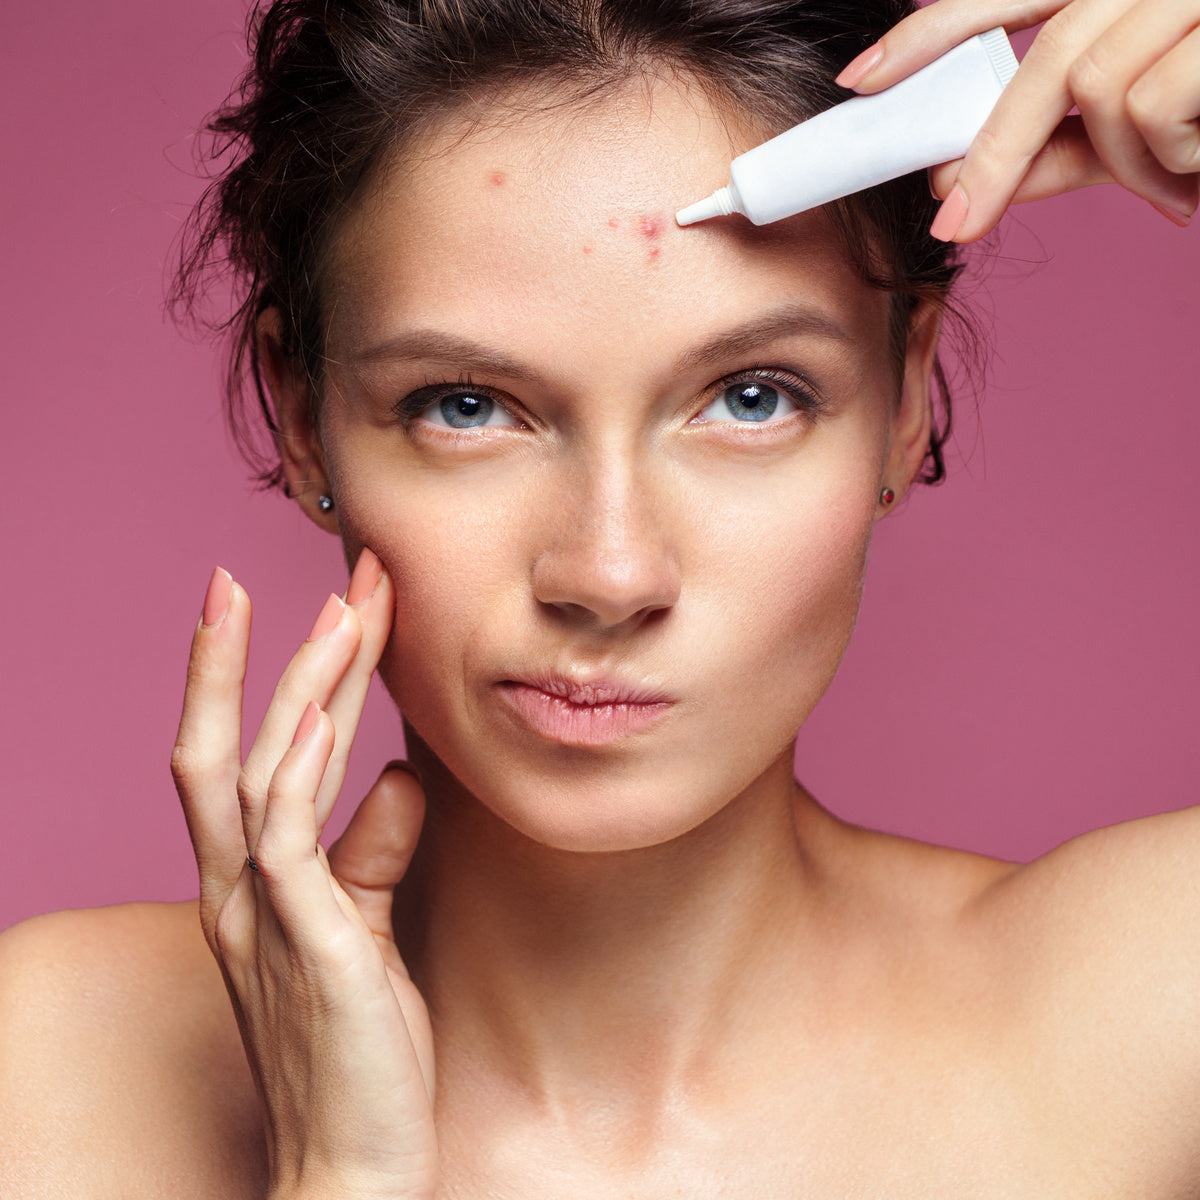 Acne Prevention Tips To Help You Get Clear Skin